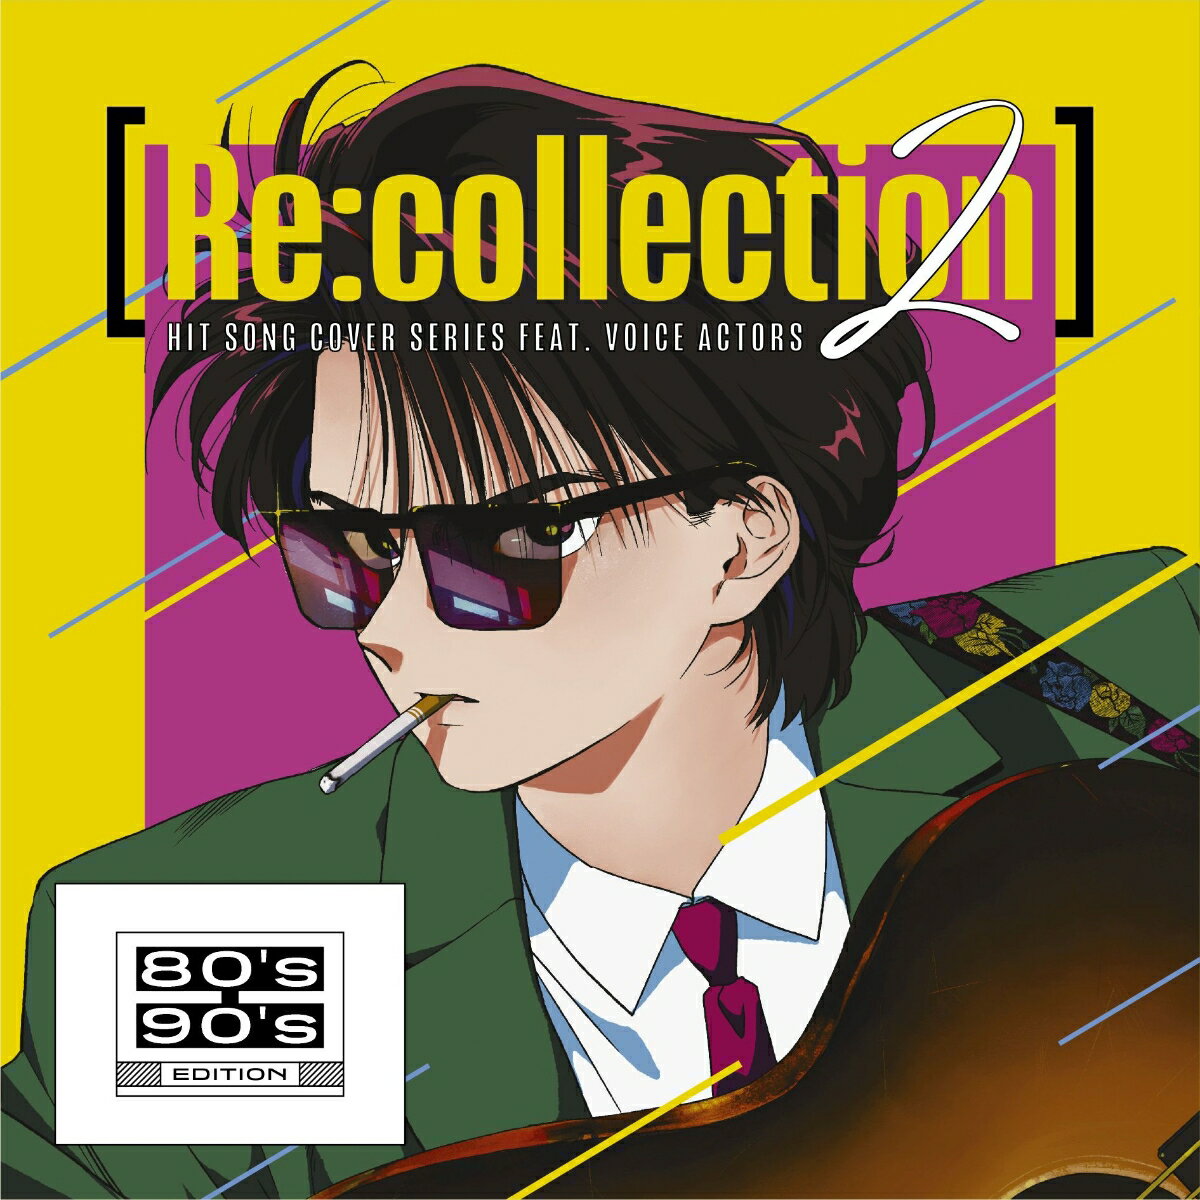 [Re:collection] HIT SONG cover series feat.voice actors 2 ~80's-90's EDITION~(A4クリアポスター) [ (V.A.) ]